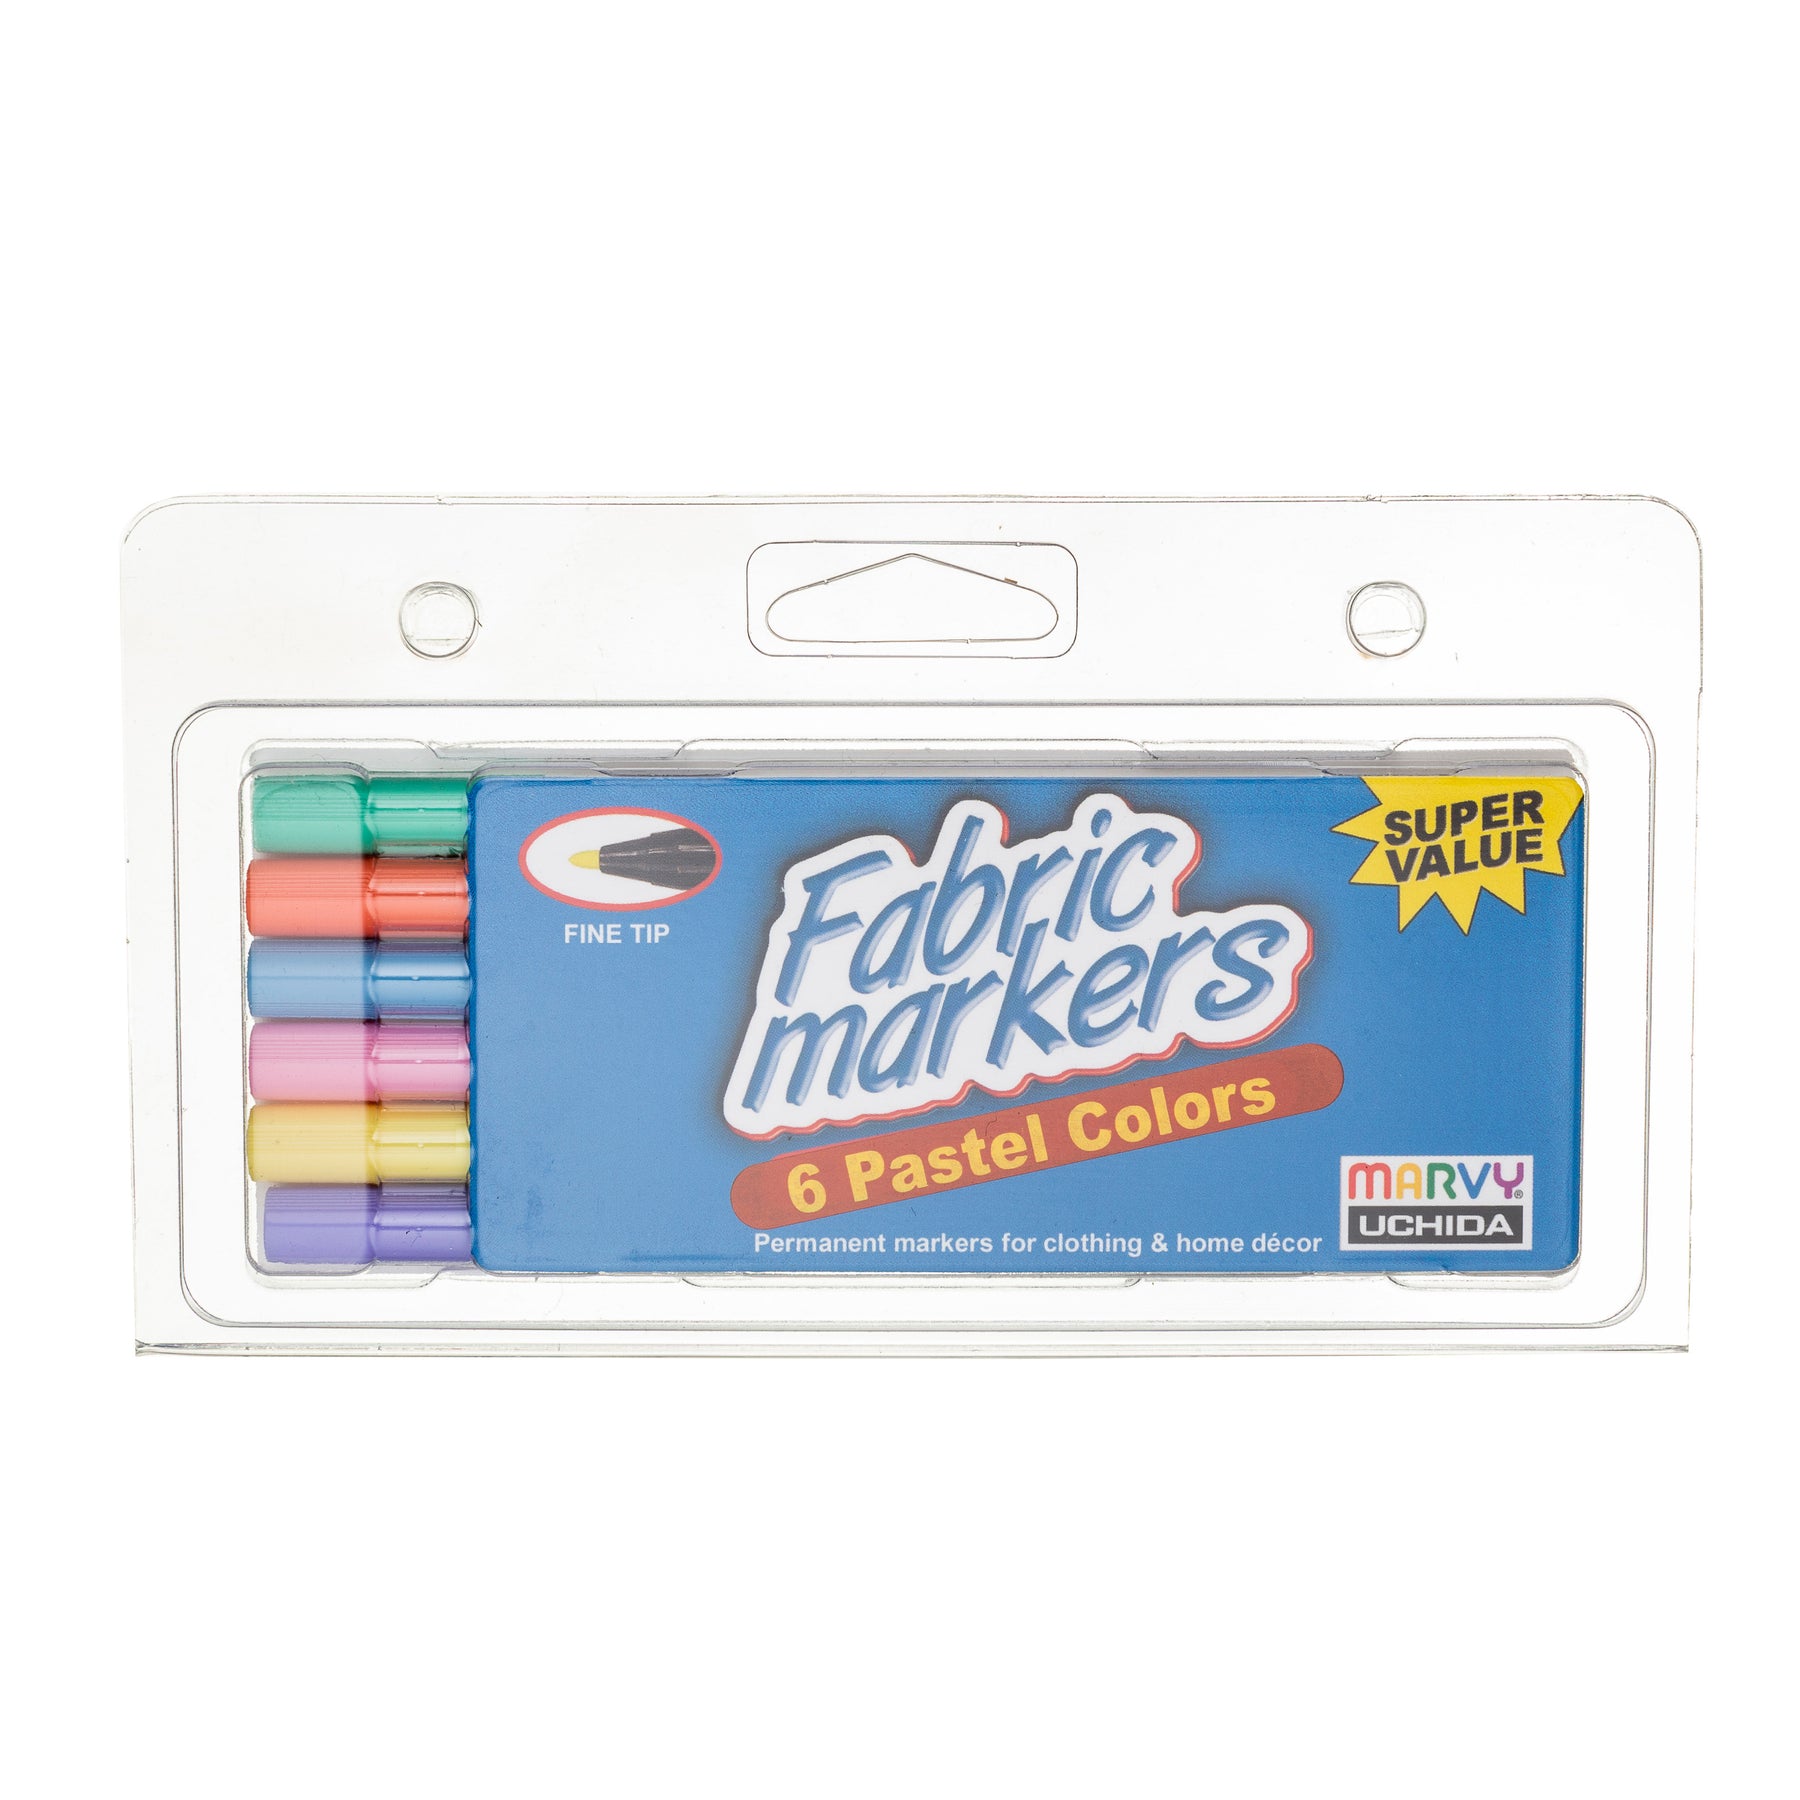 20 Unique Pastel Colors Dual Tip Fabric & T-Shirt Marker Set - Double-Ended  Fabric Markers with Chisel Point and Fine Point Tips - Bold Permanent Ink